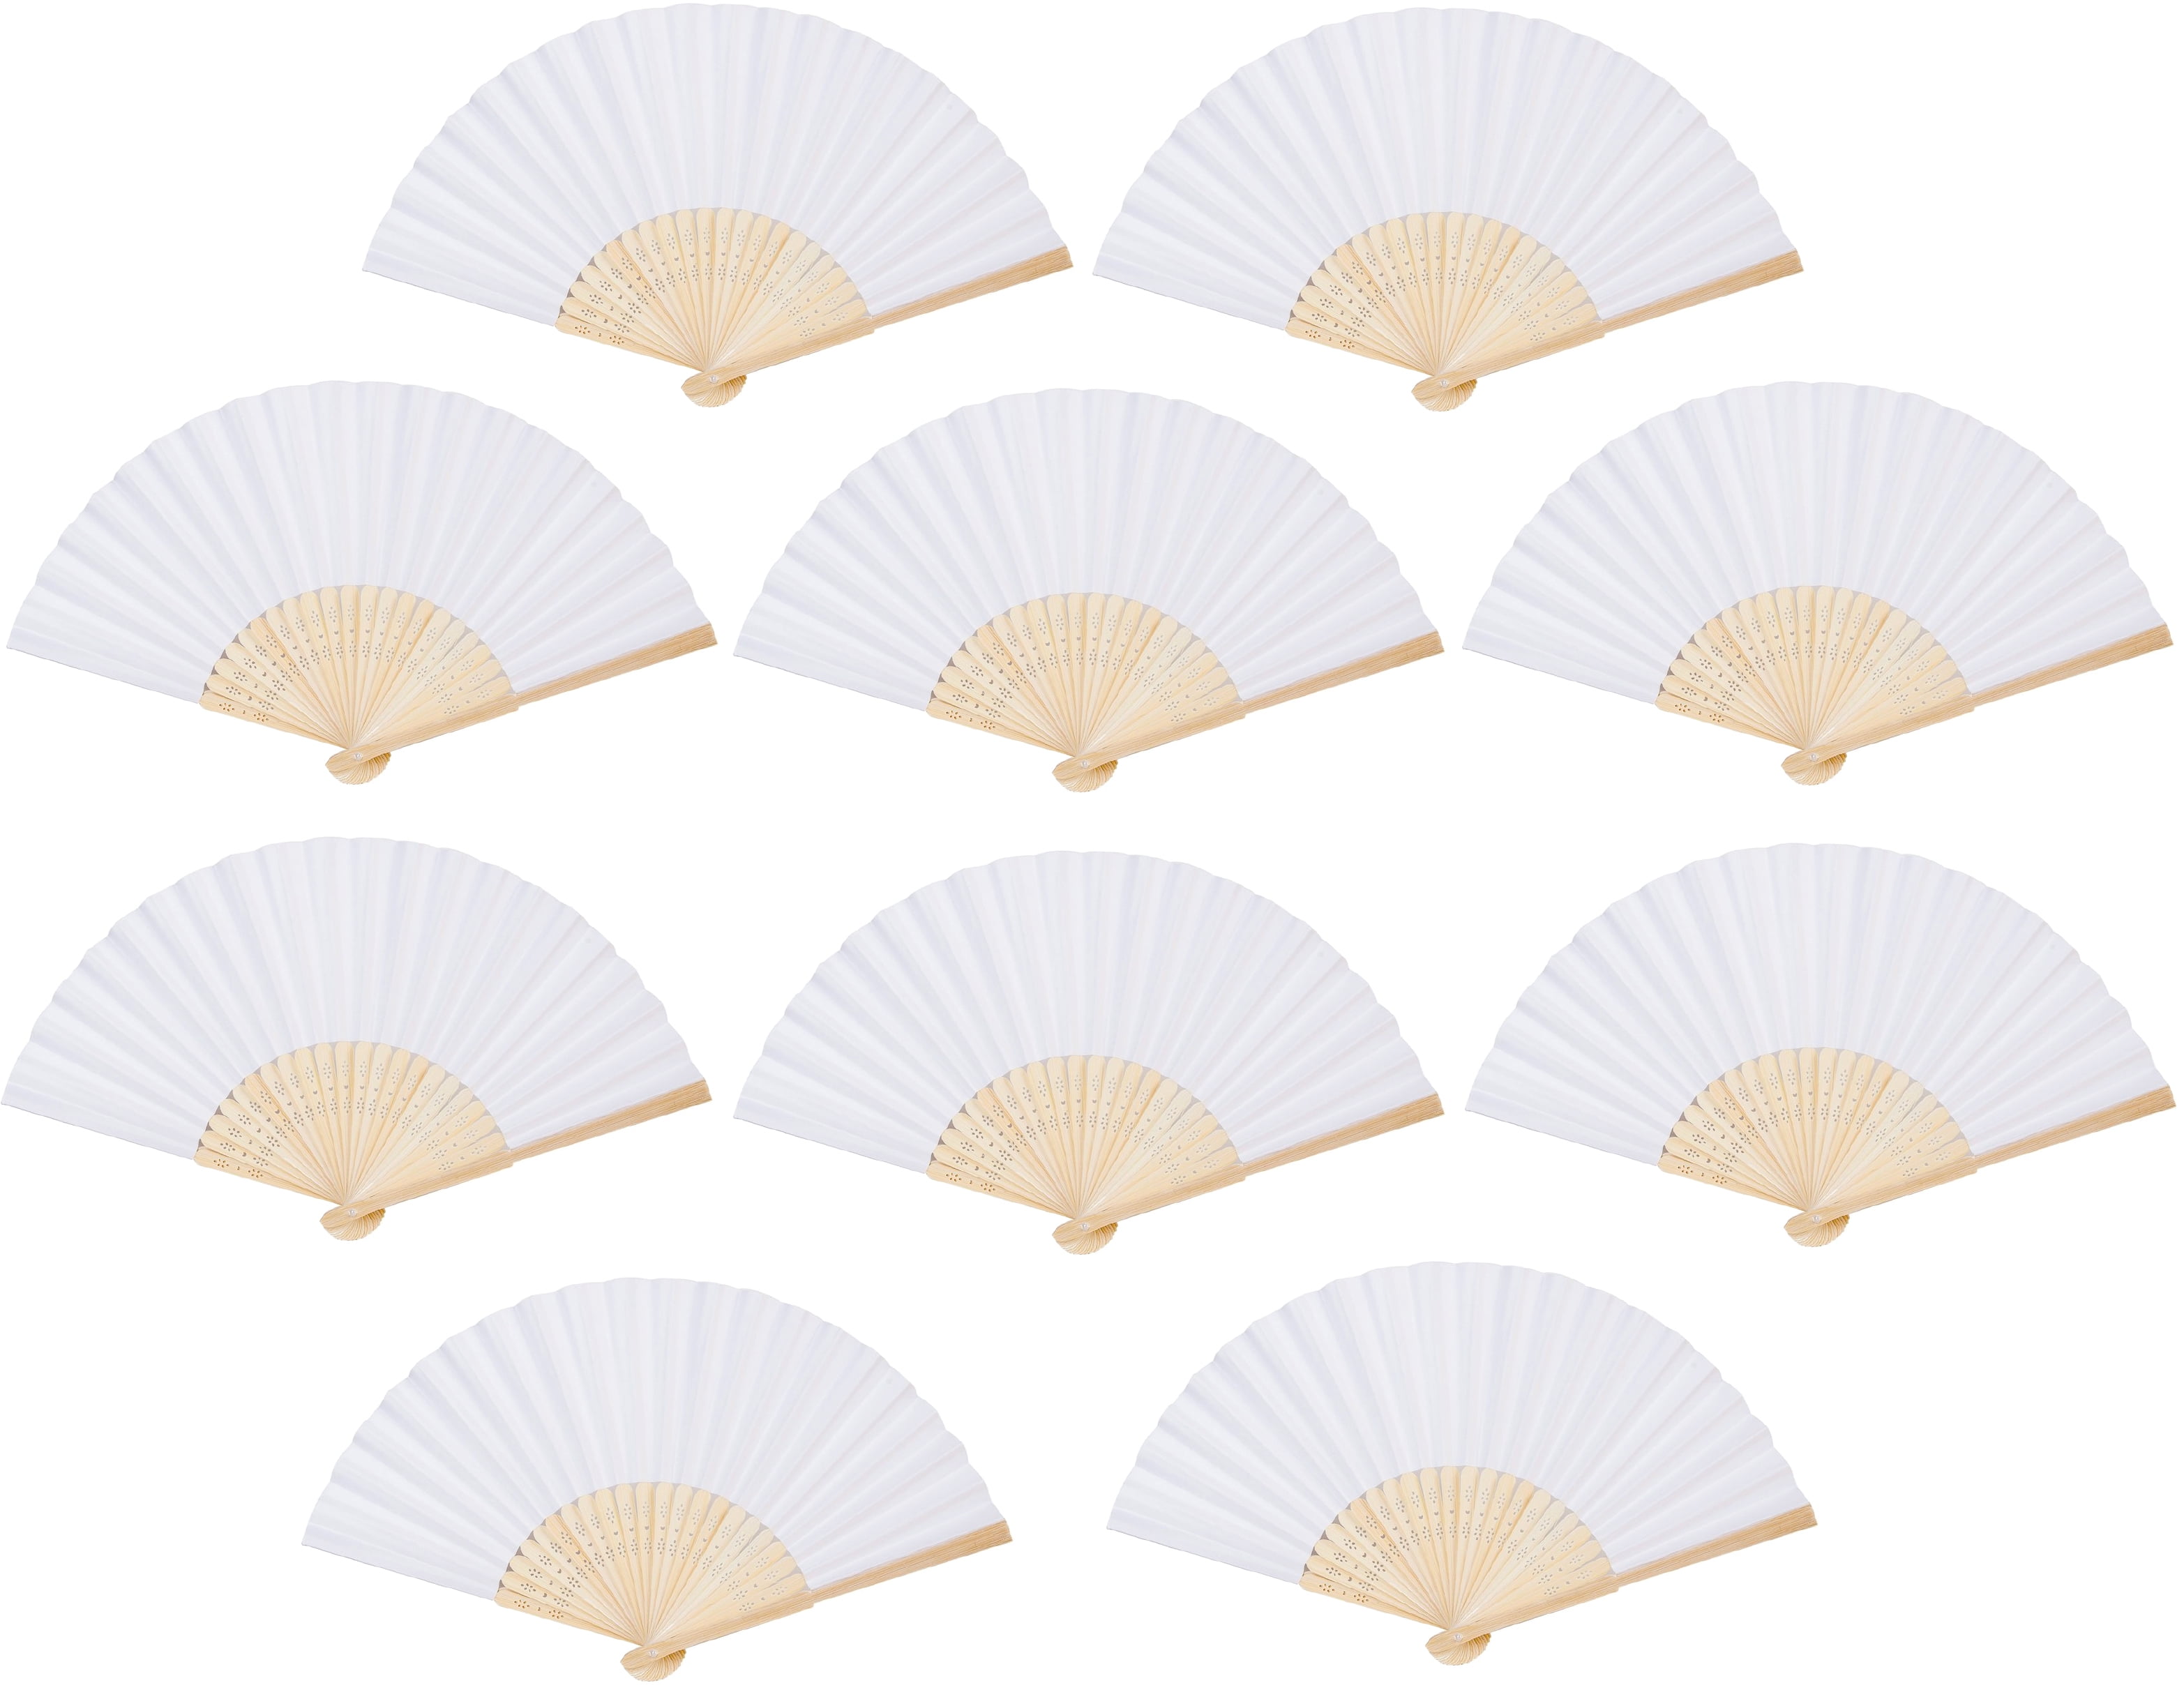 10 Pack Red Paper Hand Fans Bamboo Chinese Folding Pocket Fan Decor Gifts New 